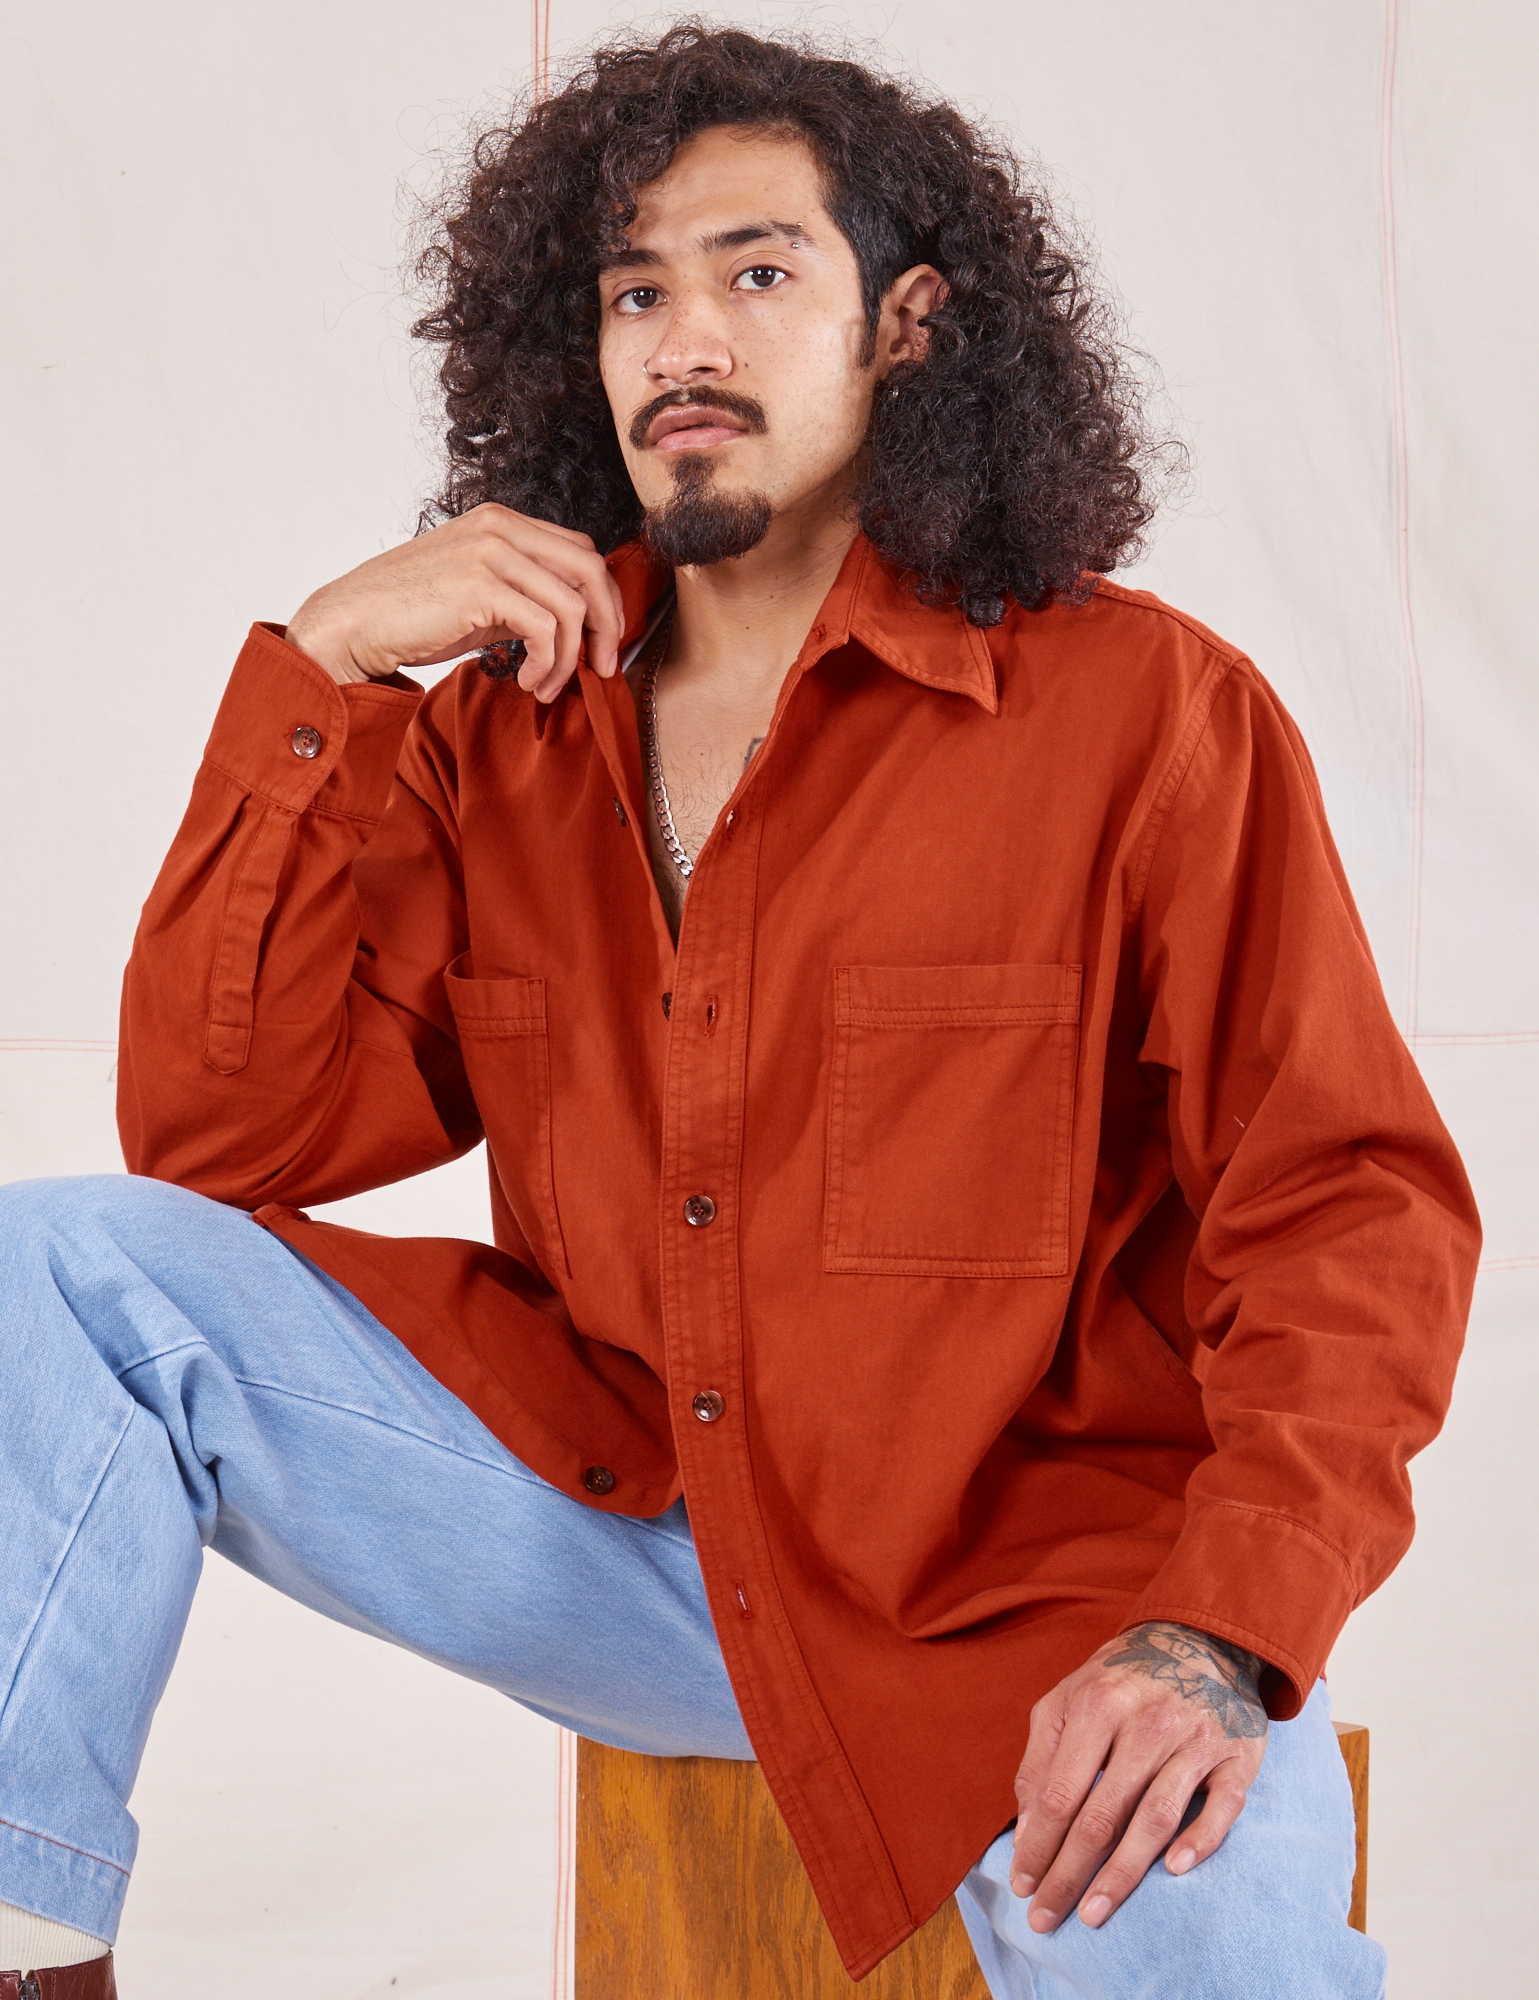 Jesse is wearing Oversize Overshirt in Paprika